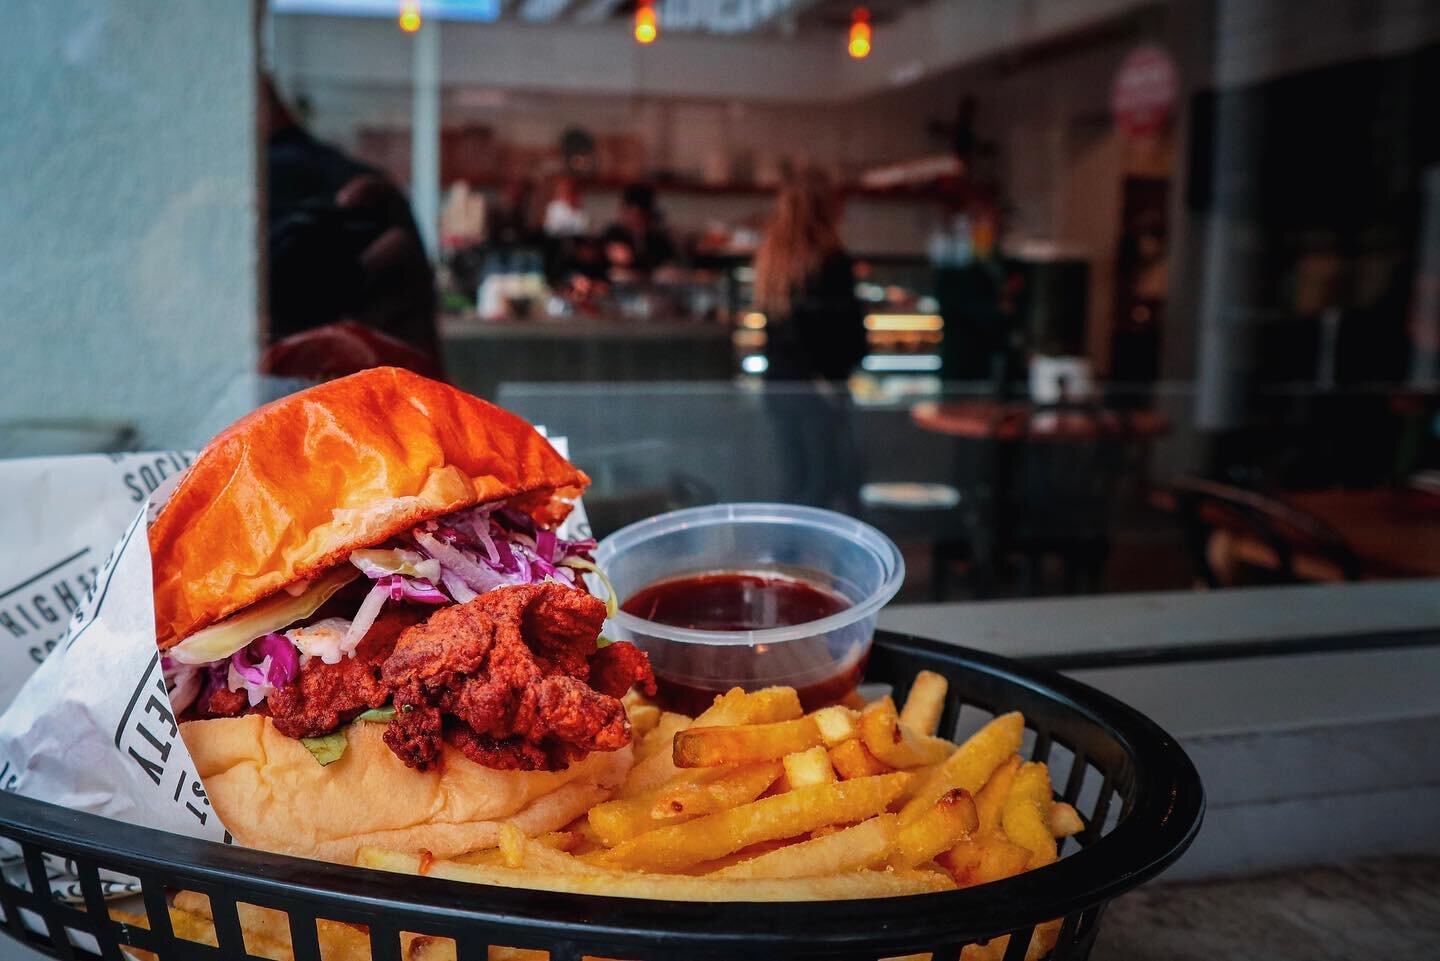 We hear your calls for a burger special, and bring forth our Chipotle Mayo Fried Chicken Burger 🐔🍔! What are you waiting for 😋?
.
.
.
#chipotlemayo #sydneyeats #chickenburger #friedchicken #burgerlife #brunchtime